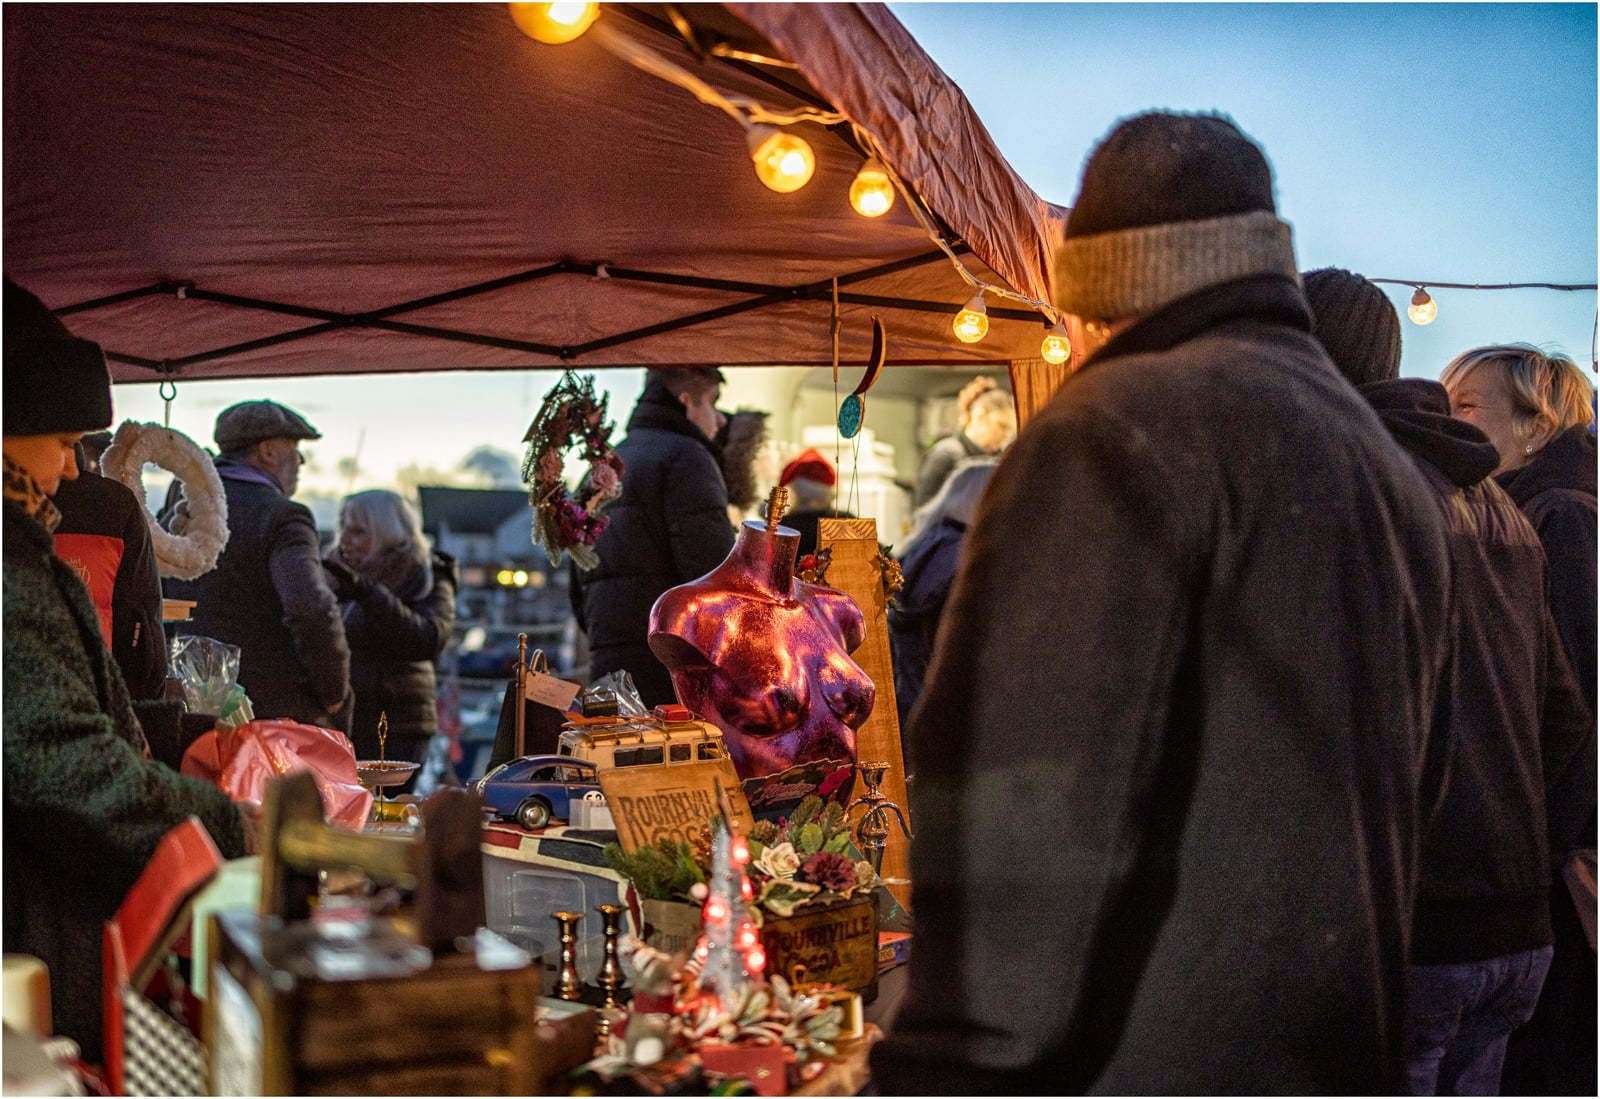 Festive shoppers packed the craft market on the quayside before the start of the Queenborough Lantern Parade on Sunday. Picture: Henry Slack